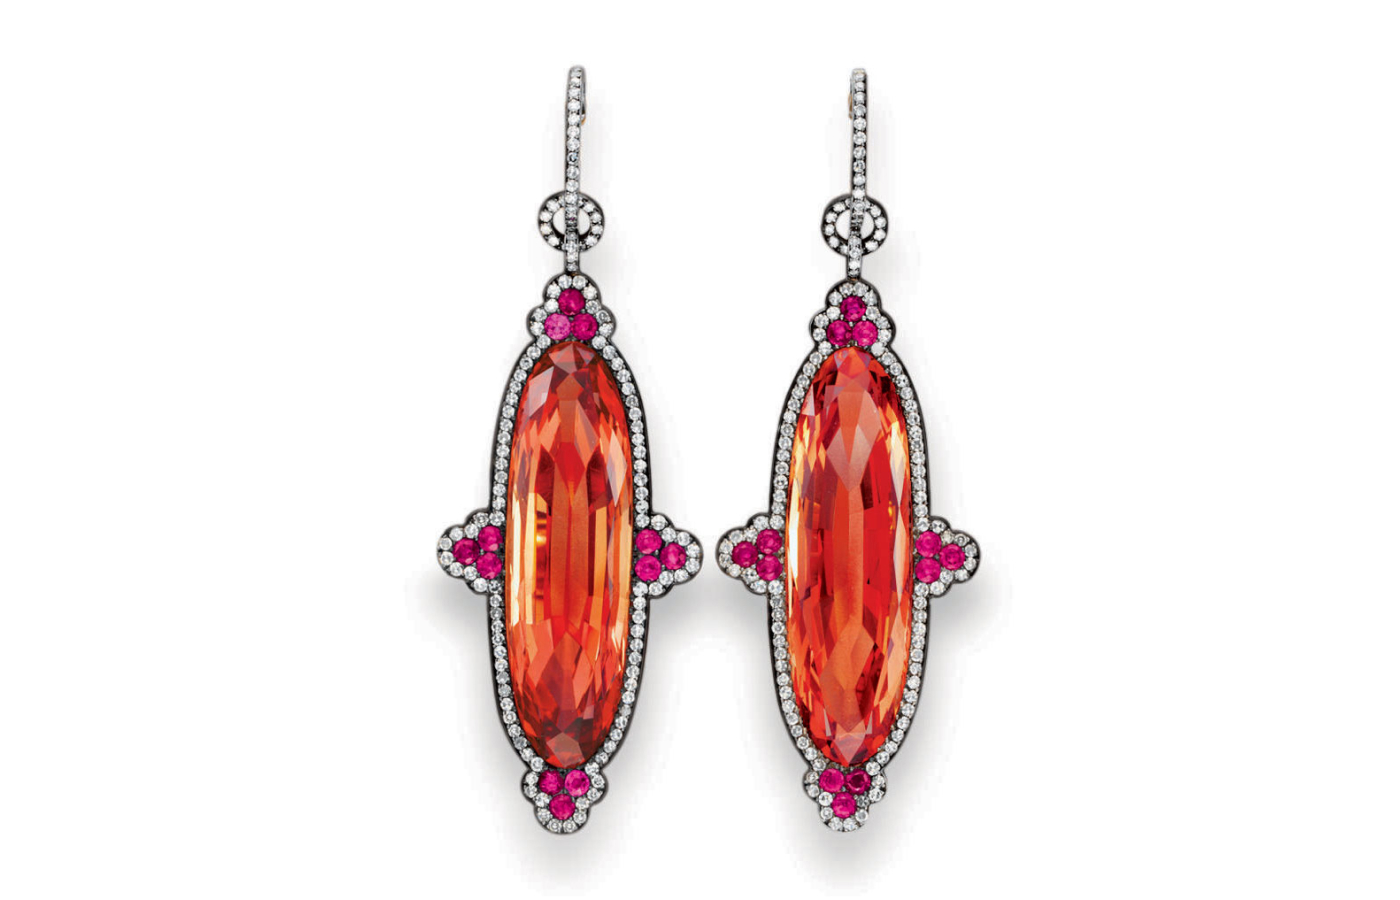 JAR earrings featuring Imperial topaz sold by Christie's auction house for $650,000 in 2010